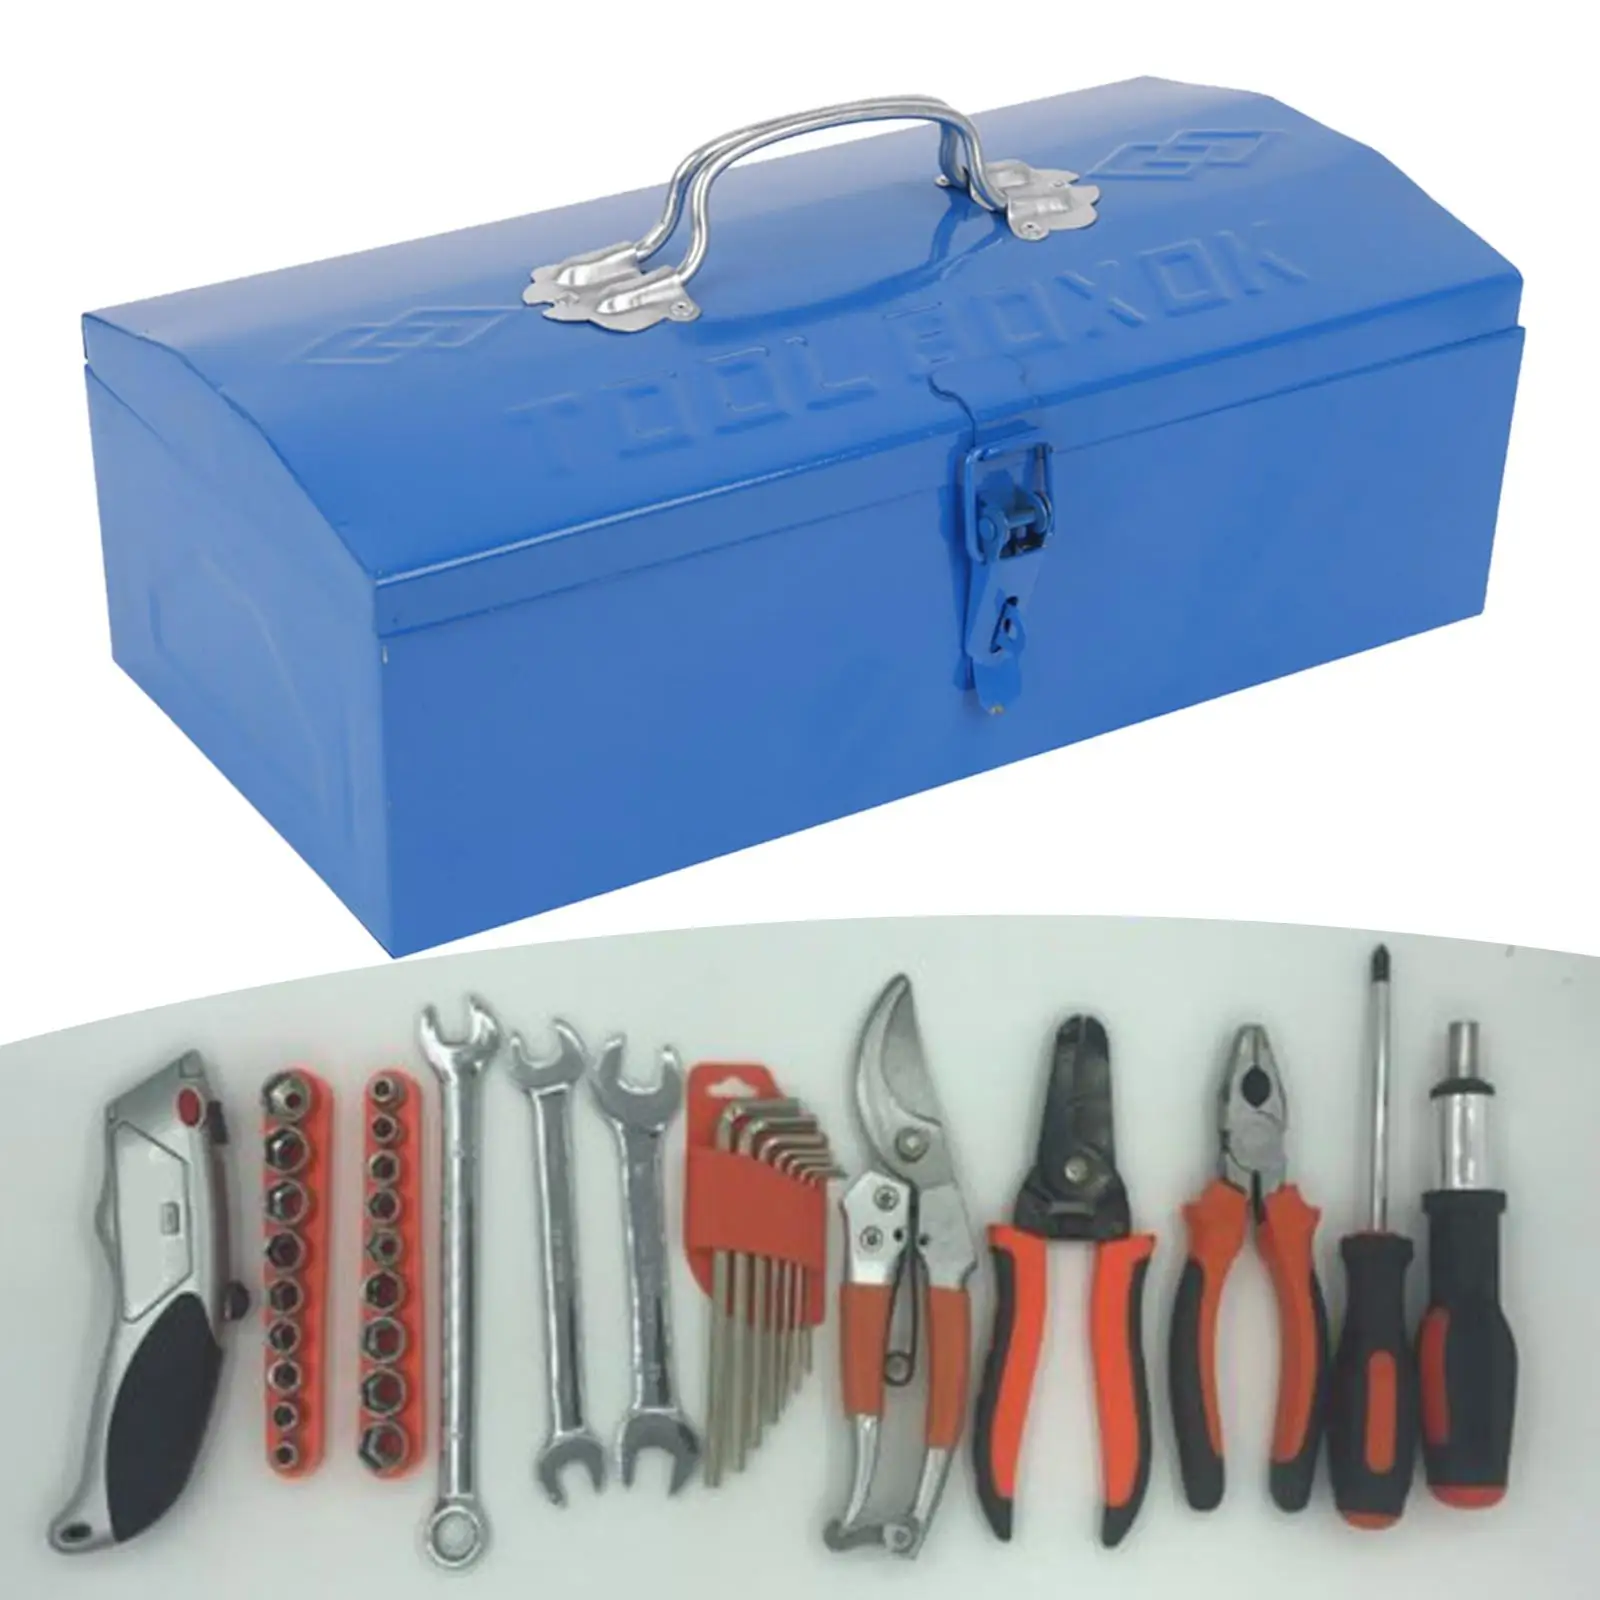 Iron Tool Box Heavy Duty with Folding Handle Container Multipurpose Tool Storage Case Repair Tool Storage Box for Workshop Home